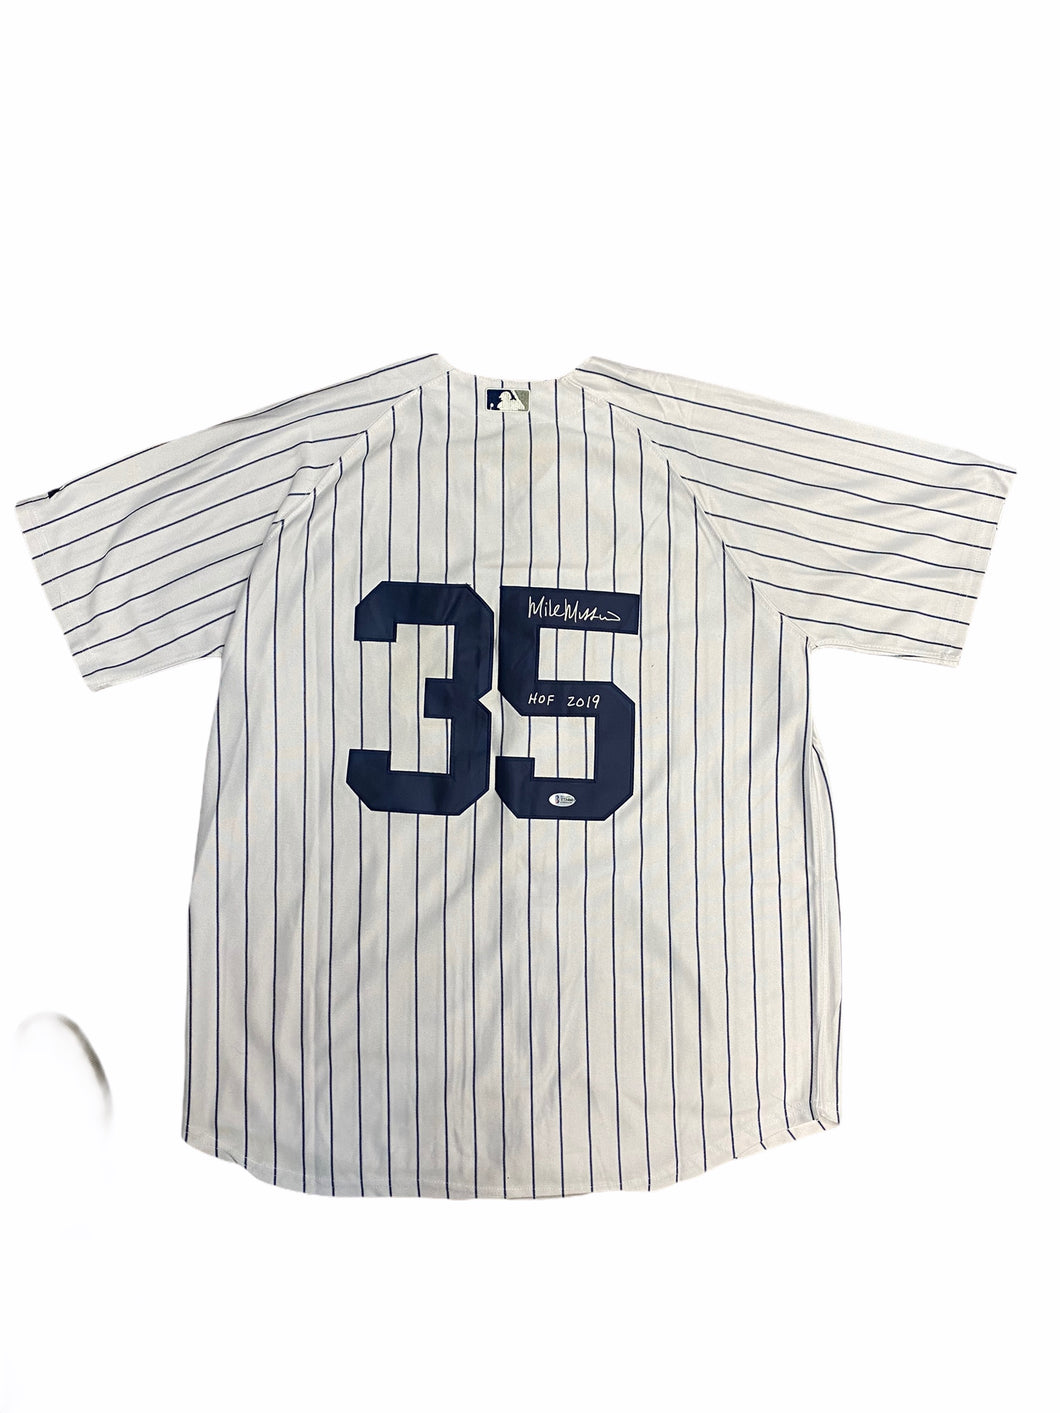 Jersey / Yankees / Mike Mussina